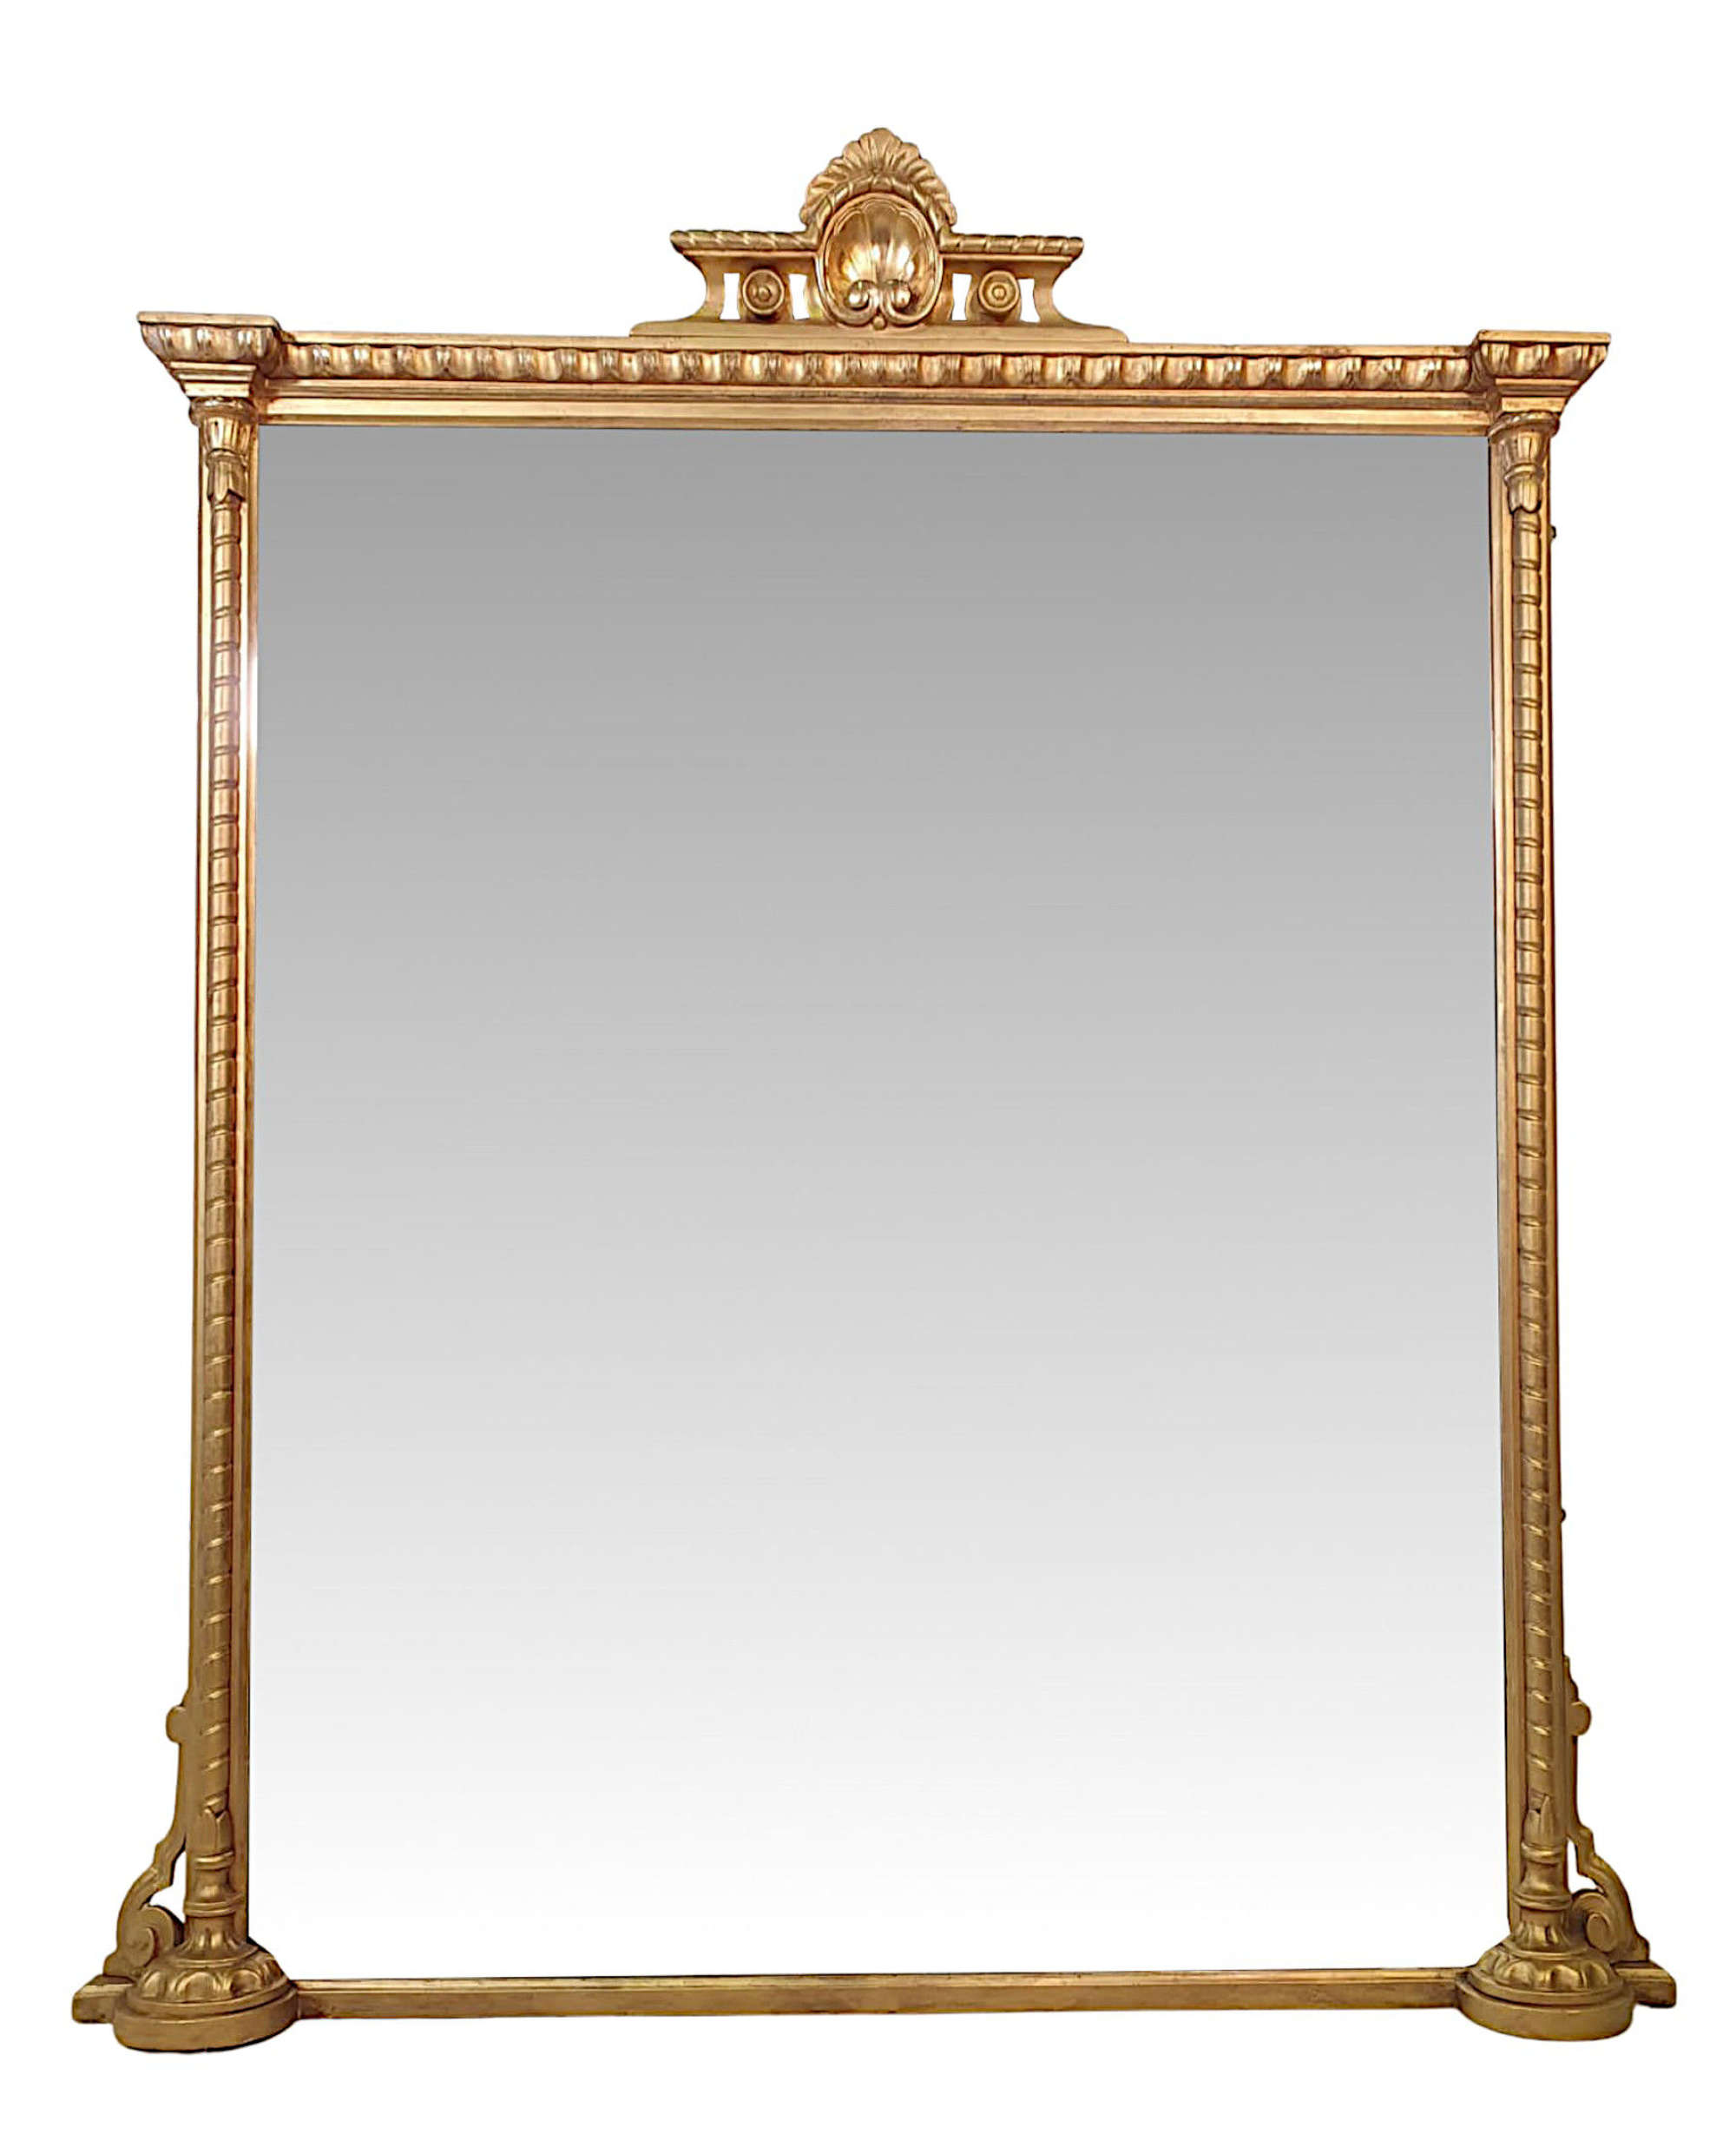 A Very Fine 19th Century Large Giltwood Overmantle Mirror